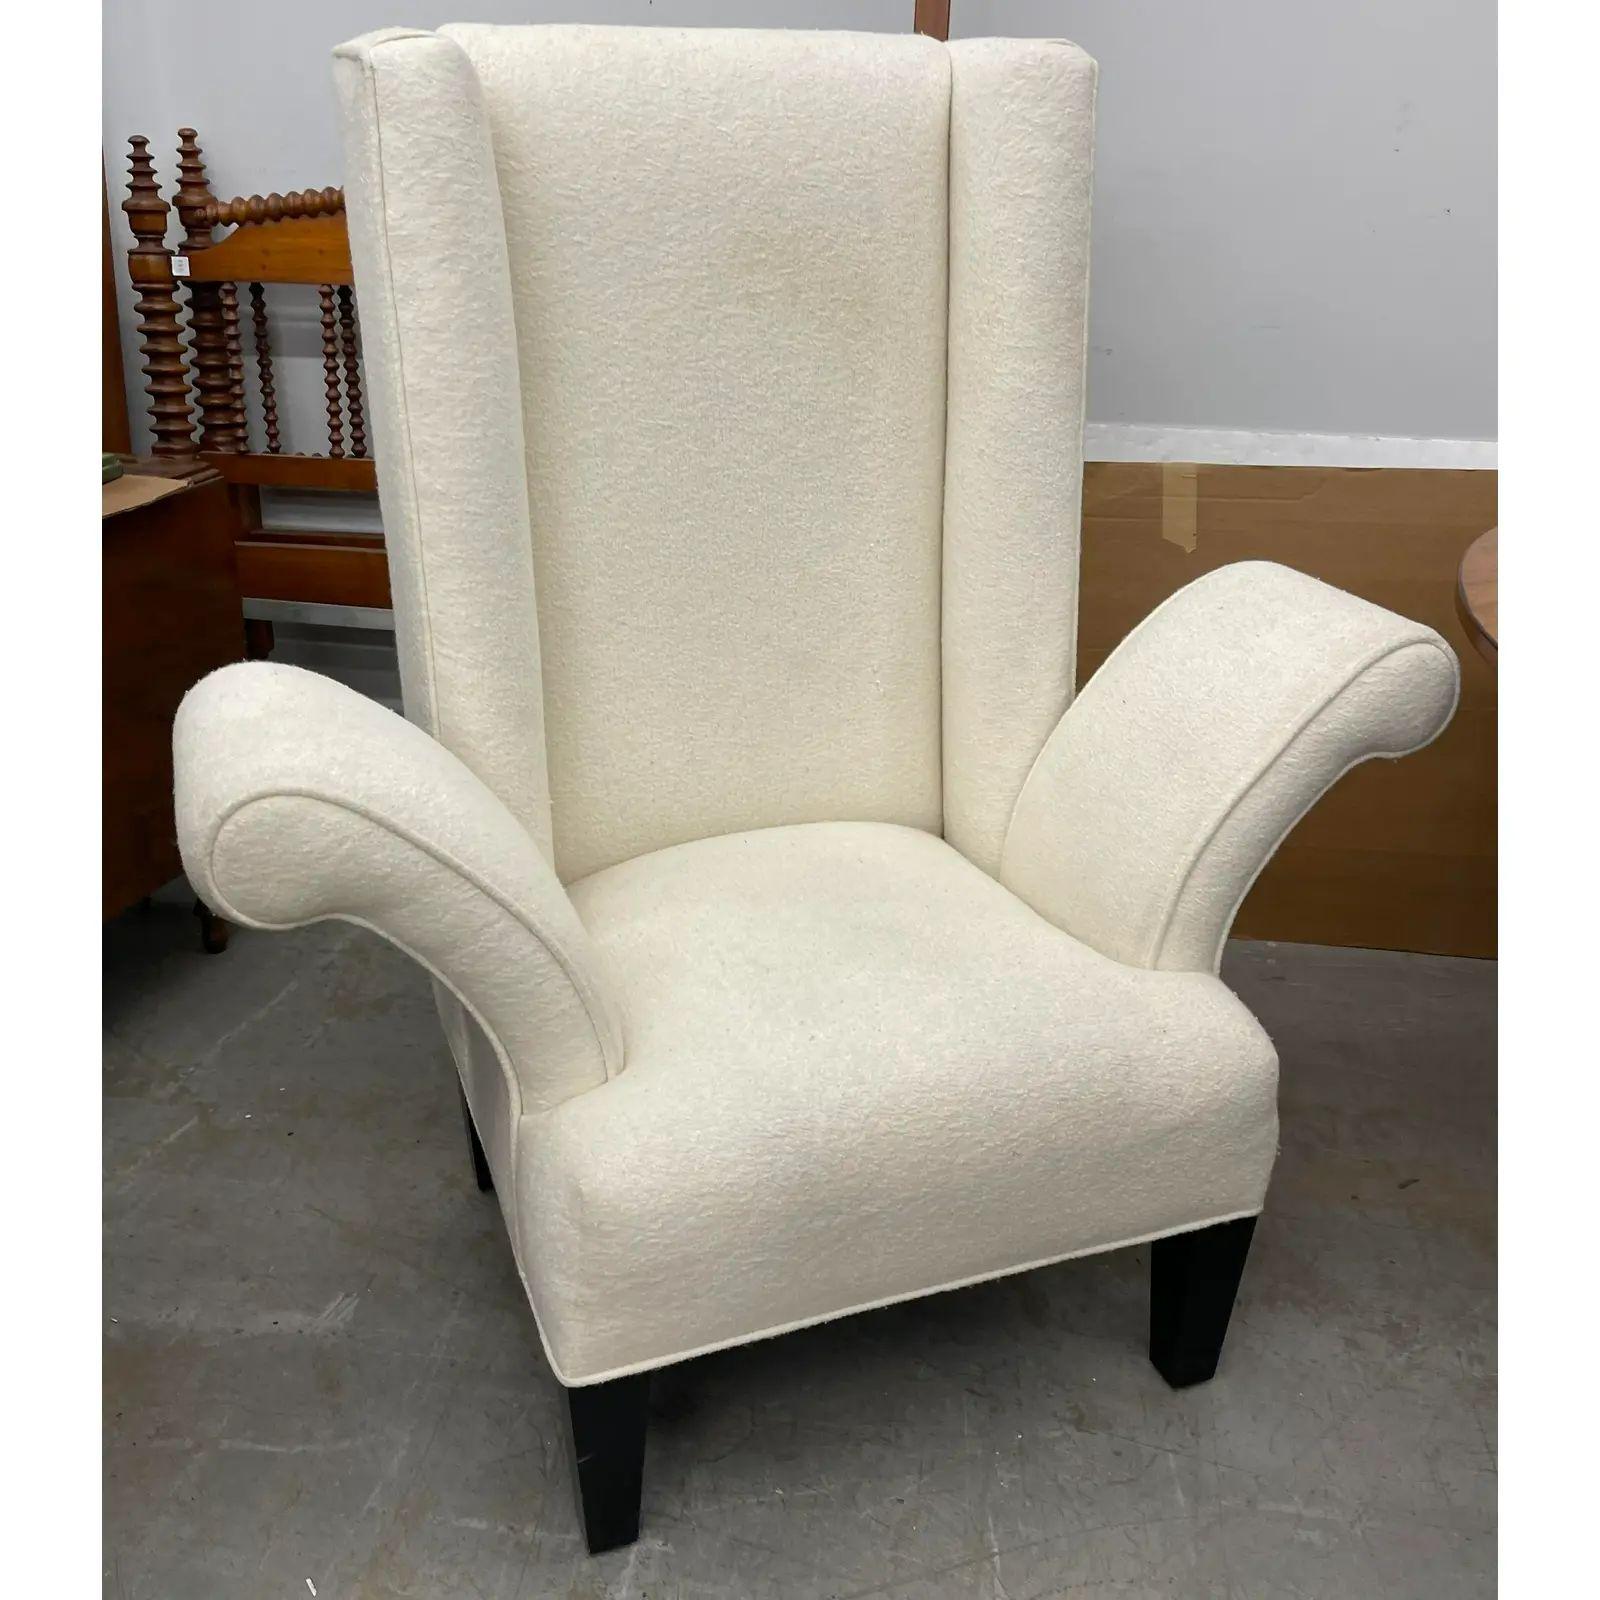 Mid Century Modern Flamboyant White Wingback Chair. It features eccentric flaring arms in elegant white upholstery.

Additional information: 
Materials: Fabric, Wood
Color: White
Period: 1960s
Styles: Mid-Century Modern
Number of Seats: 1
Item Type: